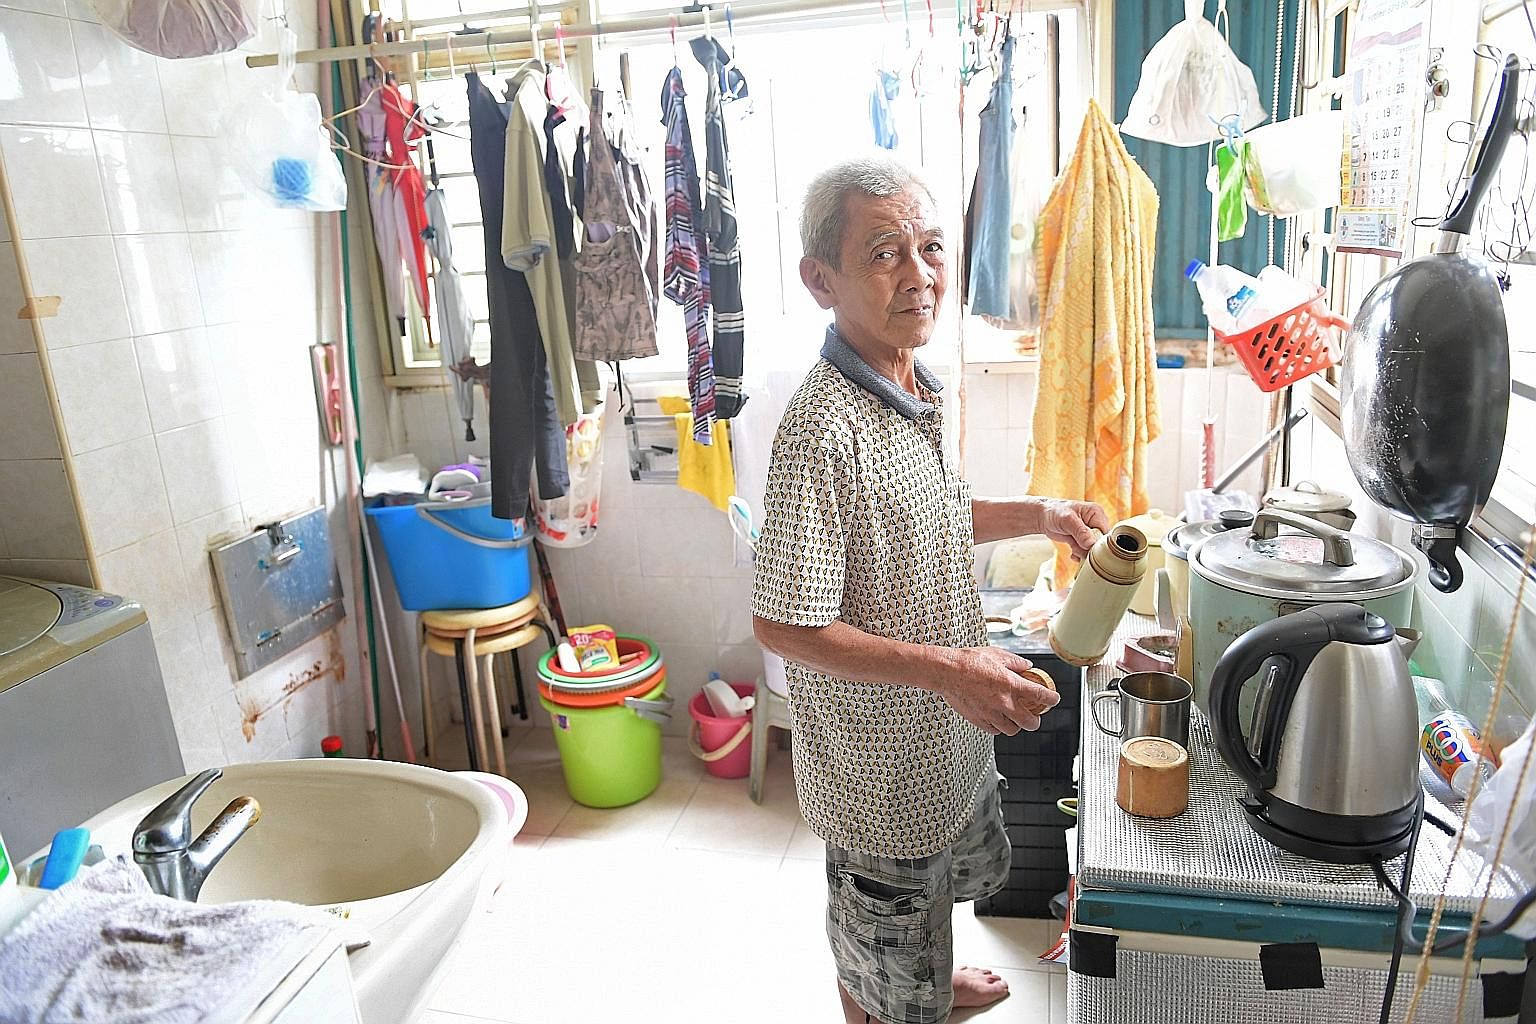 Mr Thio Sin Nam, a construction worker for most of his life, works today as a mason. The bachelor, who lives alone in his Kim Tian Road rental flat, has worked since he was just five.